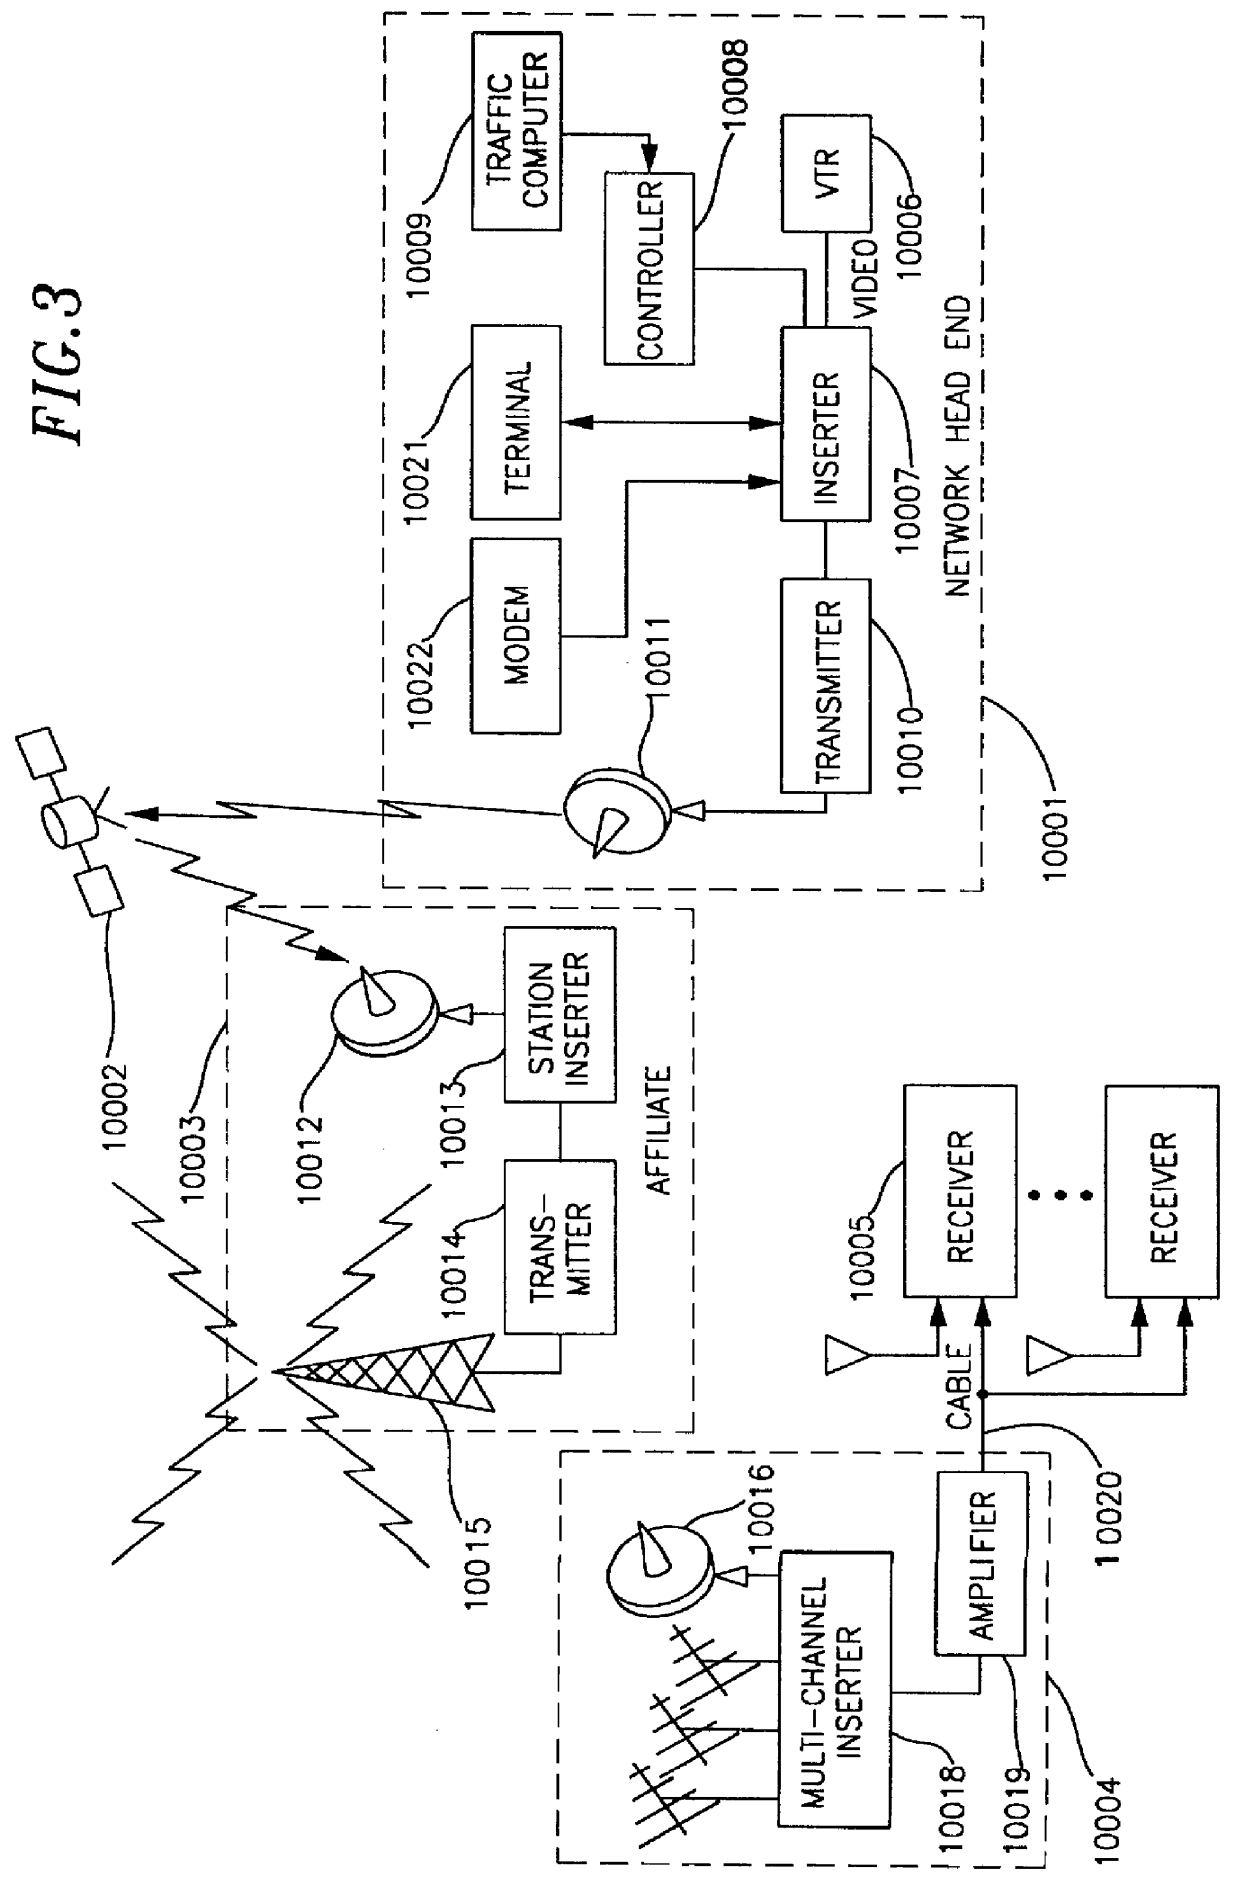 Identifier generation and remote programming for individually addressable video cassette recorders